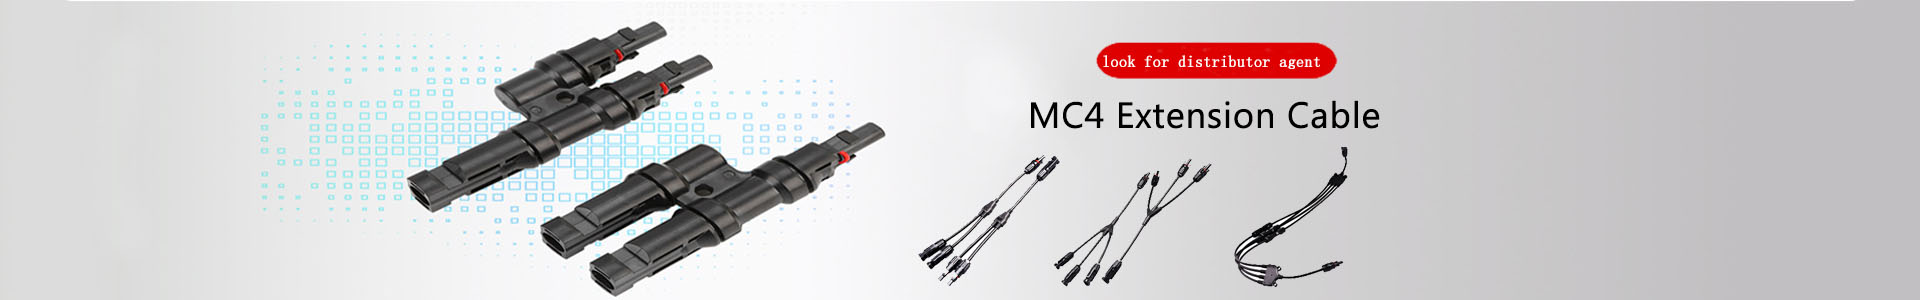 Solar cable connector for 2 #10 pv cables-Solar Connector-Solar | solar connector,solar branch connector,diode fuse connector,MC4 extnsion cable,H1Z2Z2 solar cable, UL4703 solar cable | Leading manufacturer and supplier of solar pv cables and connectors